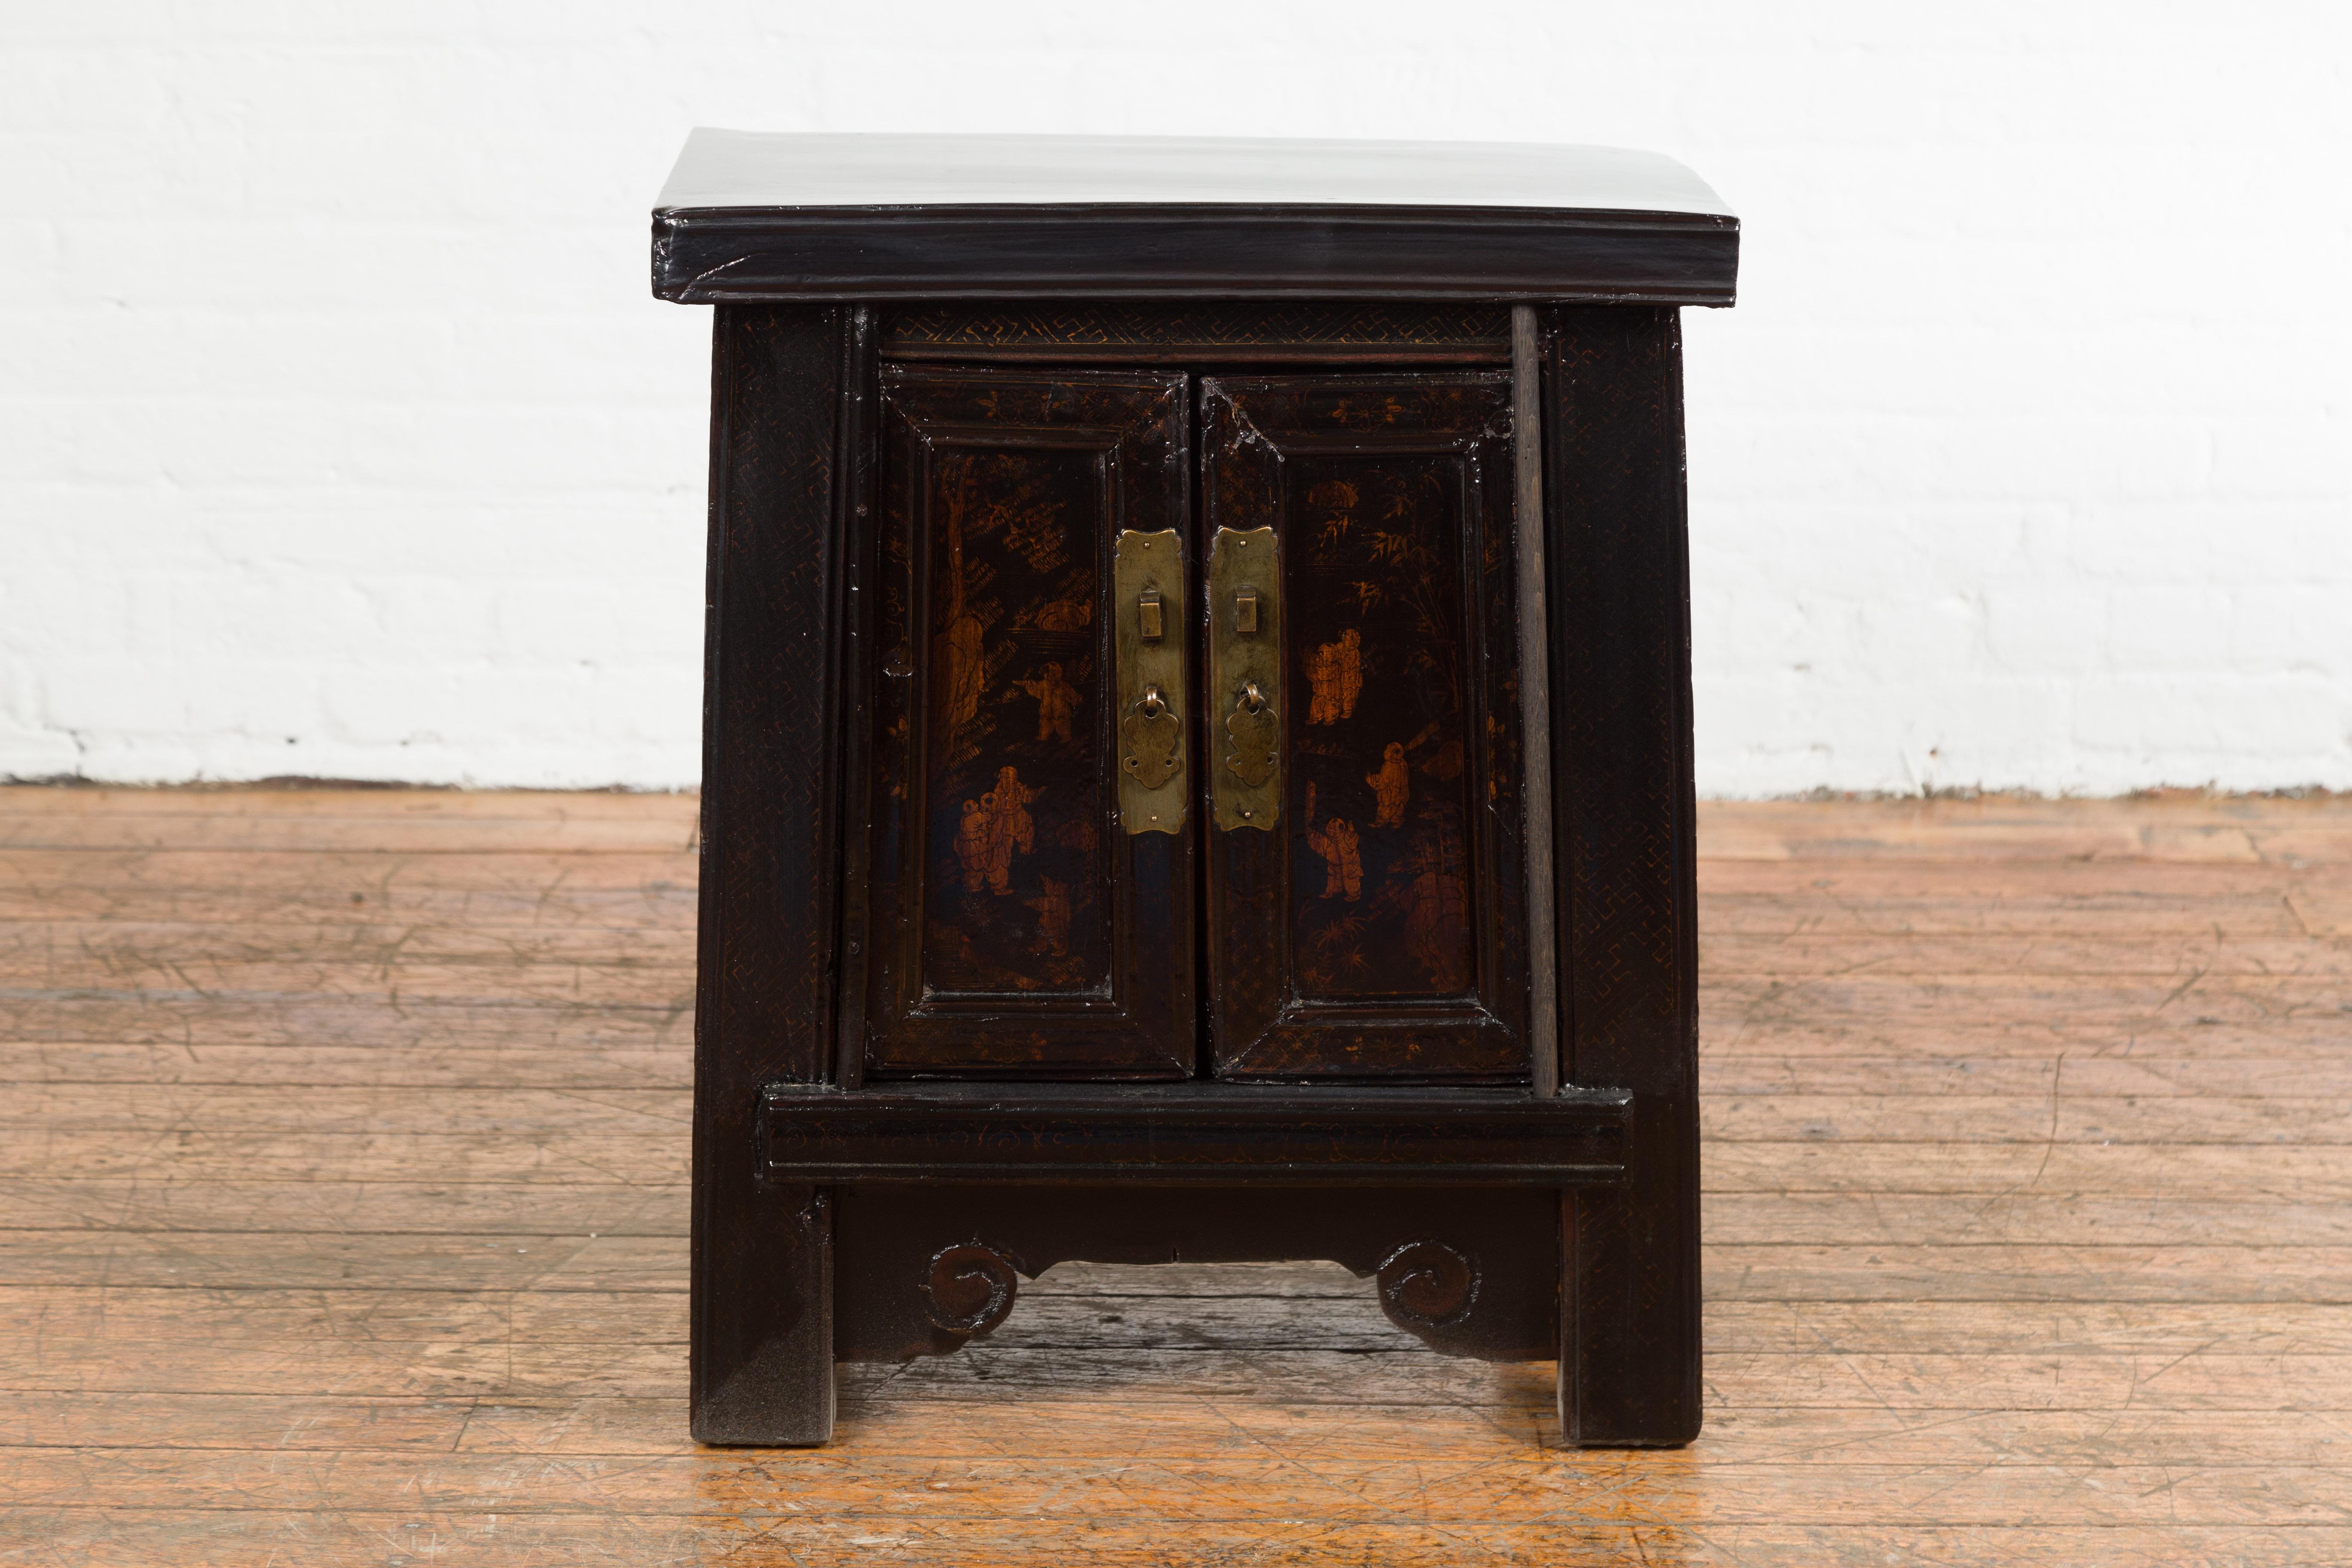 A Chinese Qing Dynasty period bedside cabinet from the 19th century with dark lacquer, hand-painted scenes on the doors and brass hardware. Invite a touch of ethereal elegance to your bedroom with this exquisite 19th-century Chinese Qing Dynasty